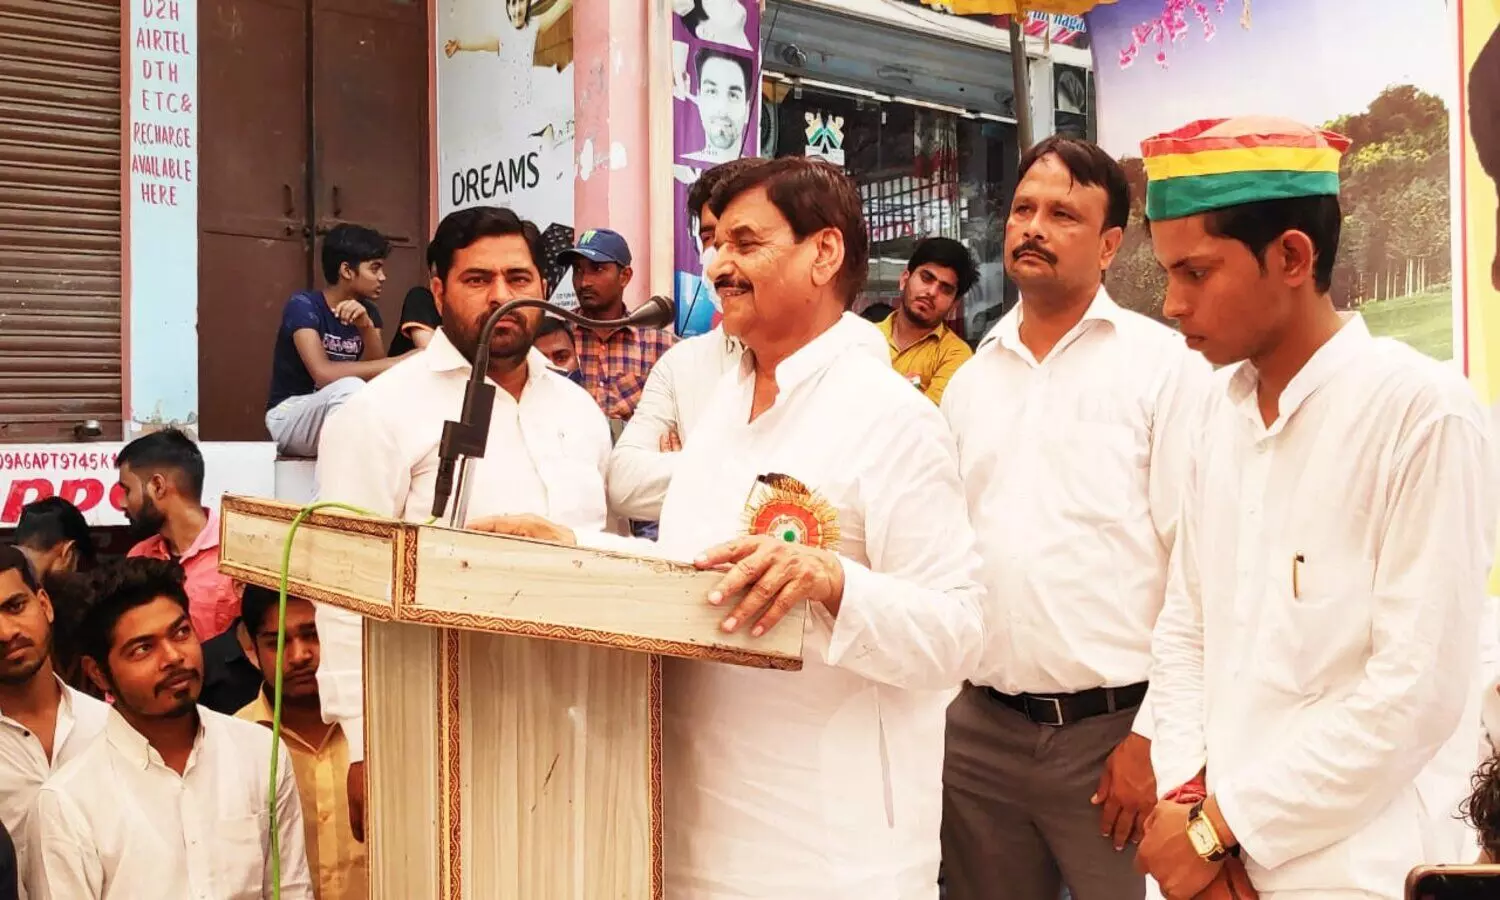 Shivpal Yadav addressing the public on independence day